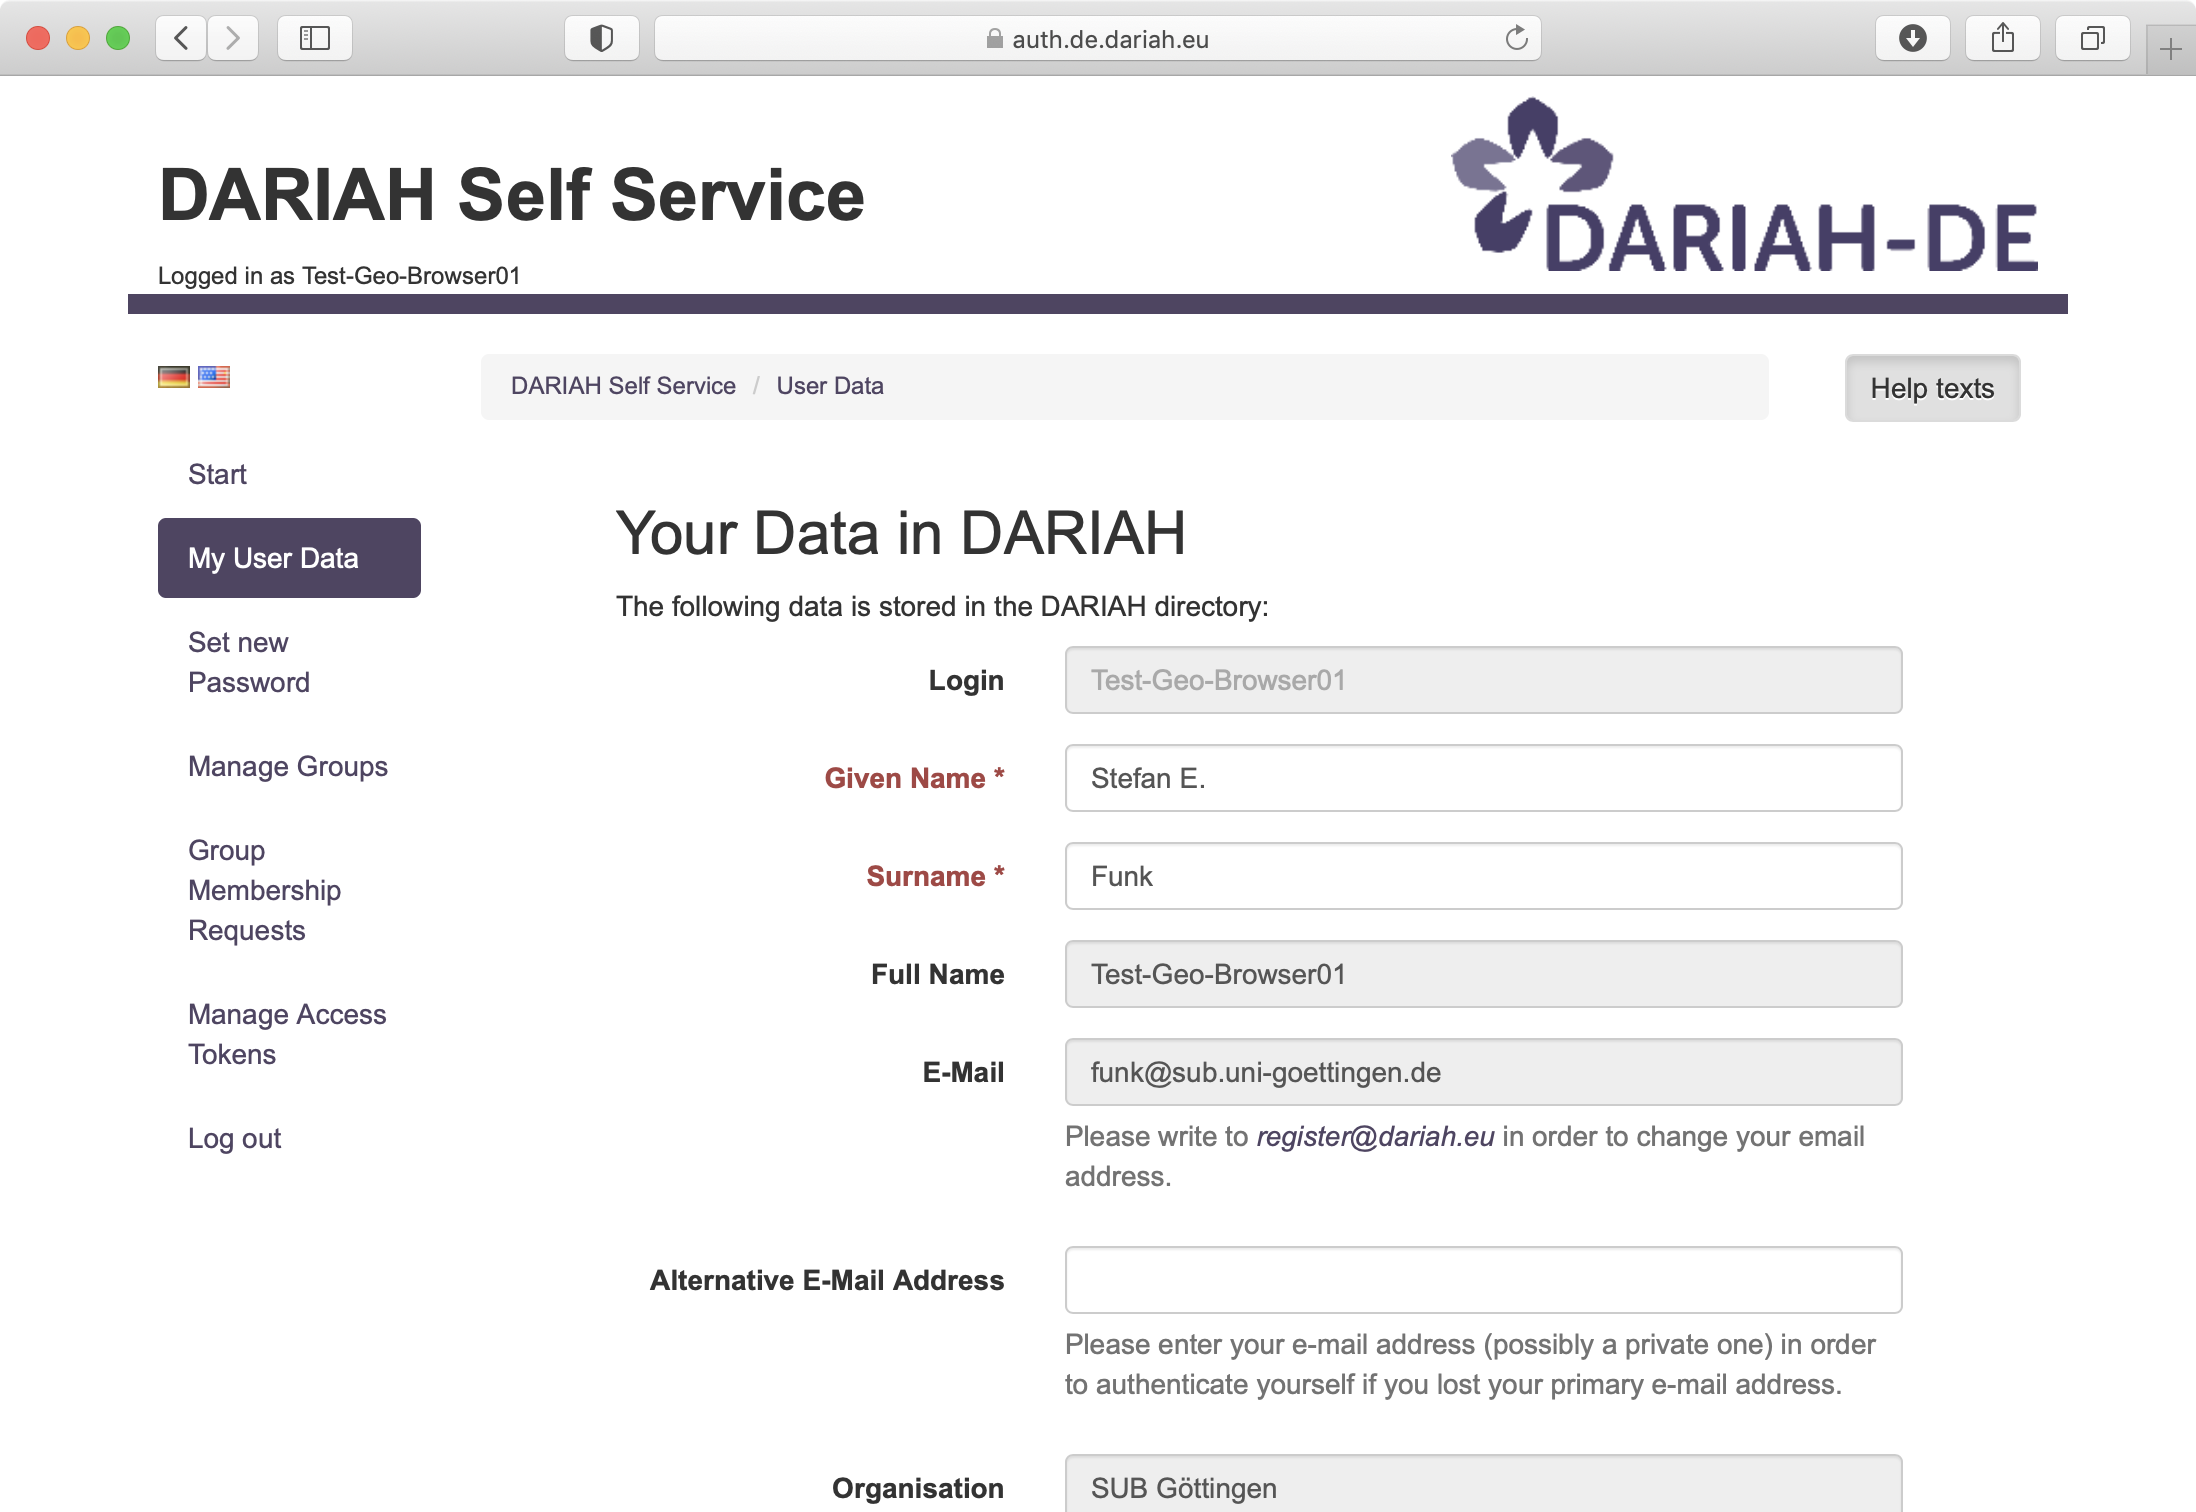 _images/2.1-datasheet-selfservice.png